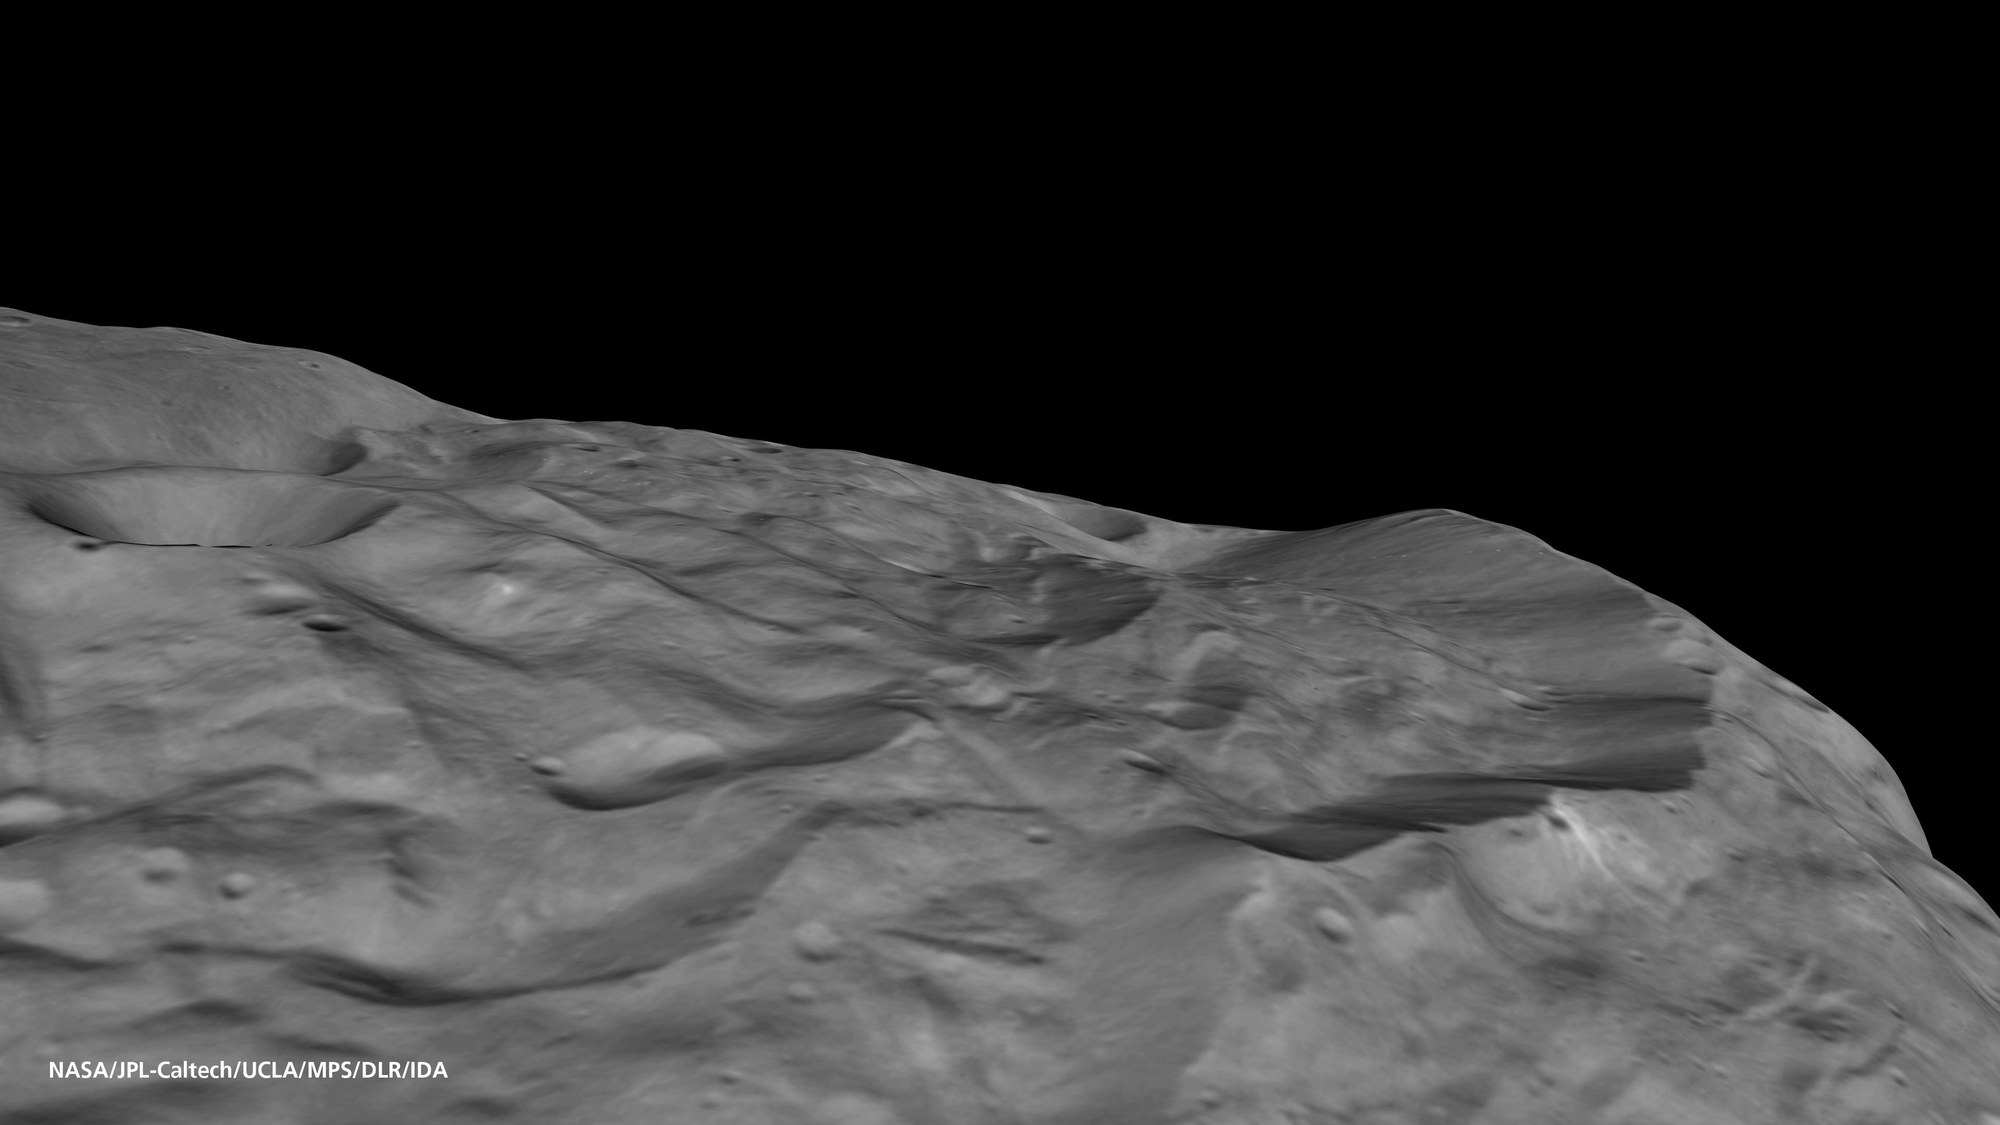 Perspective view of a part of the edge of the south pole basin on Vesta